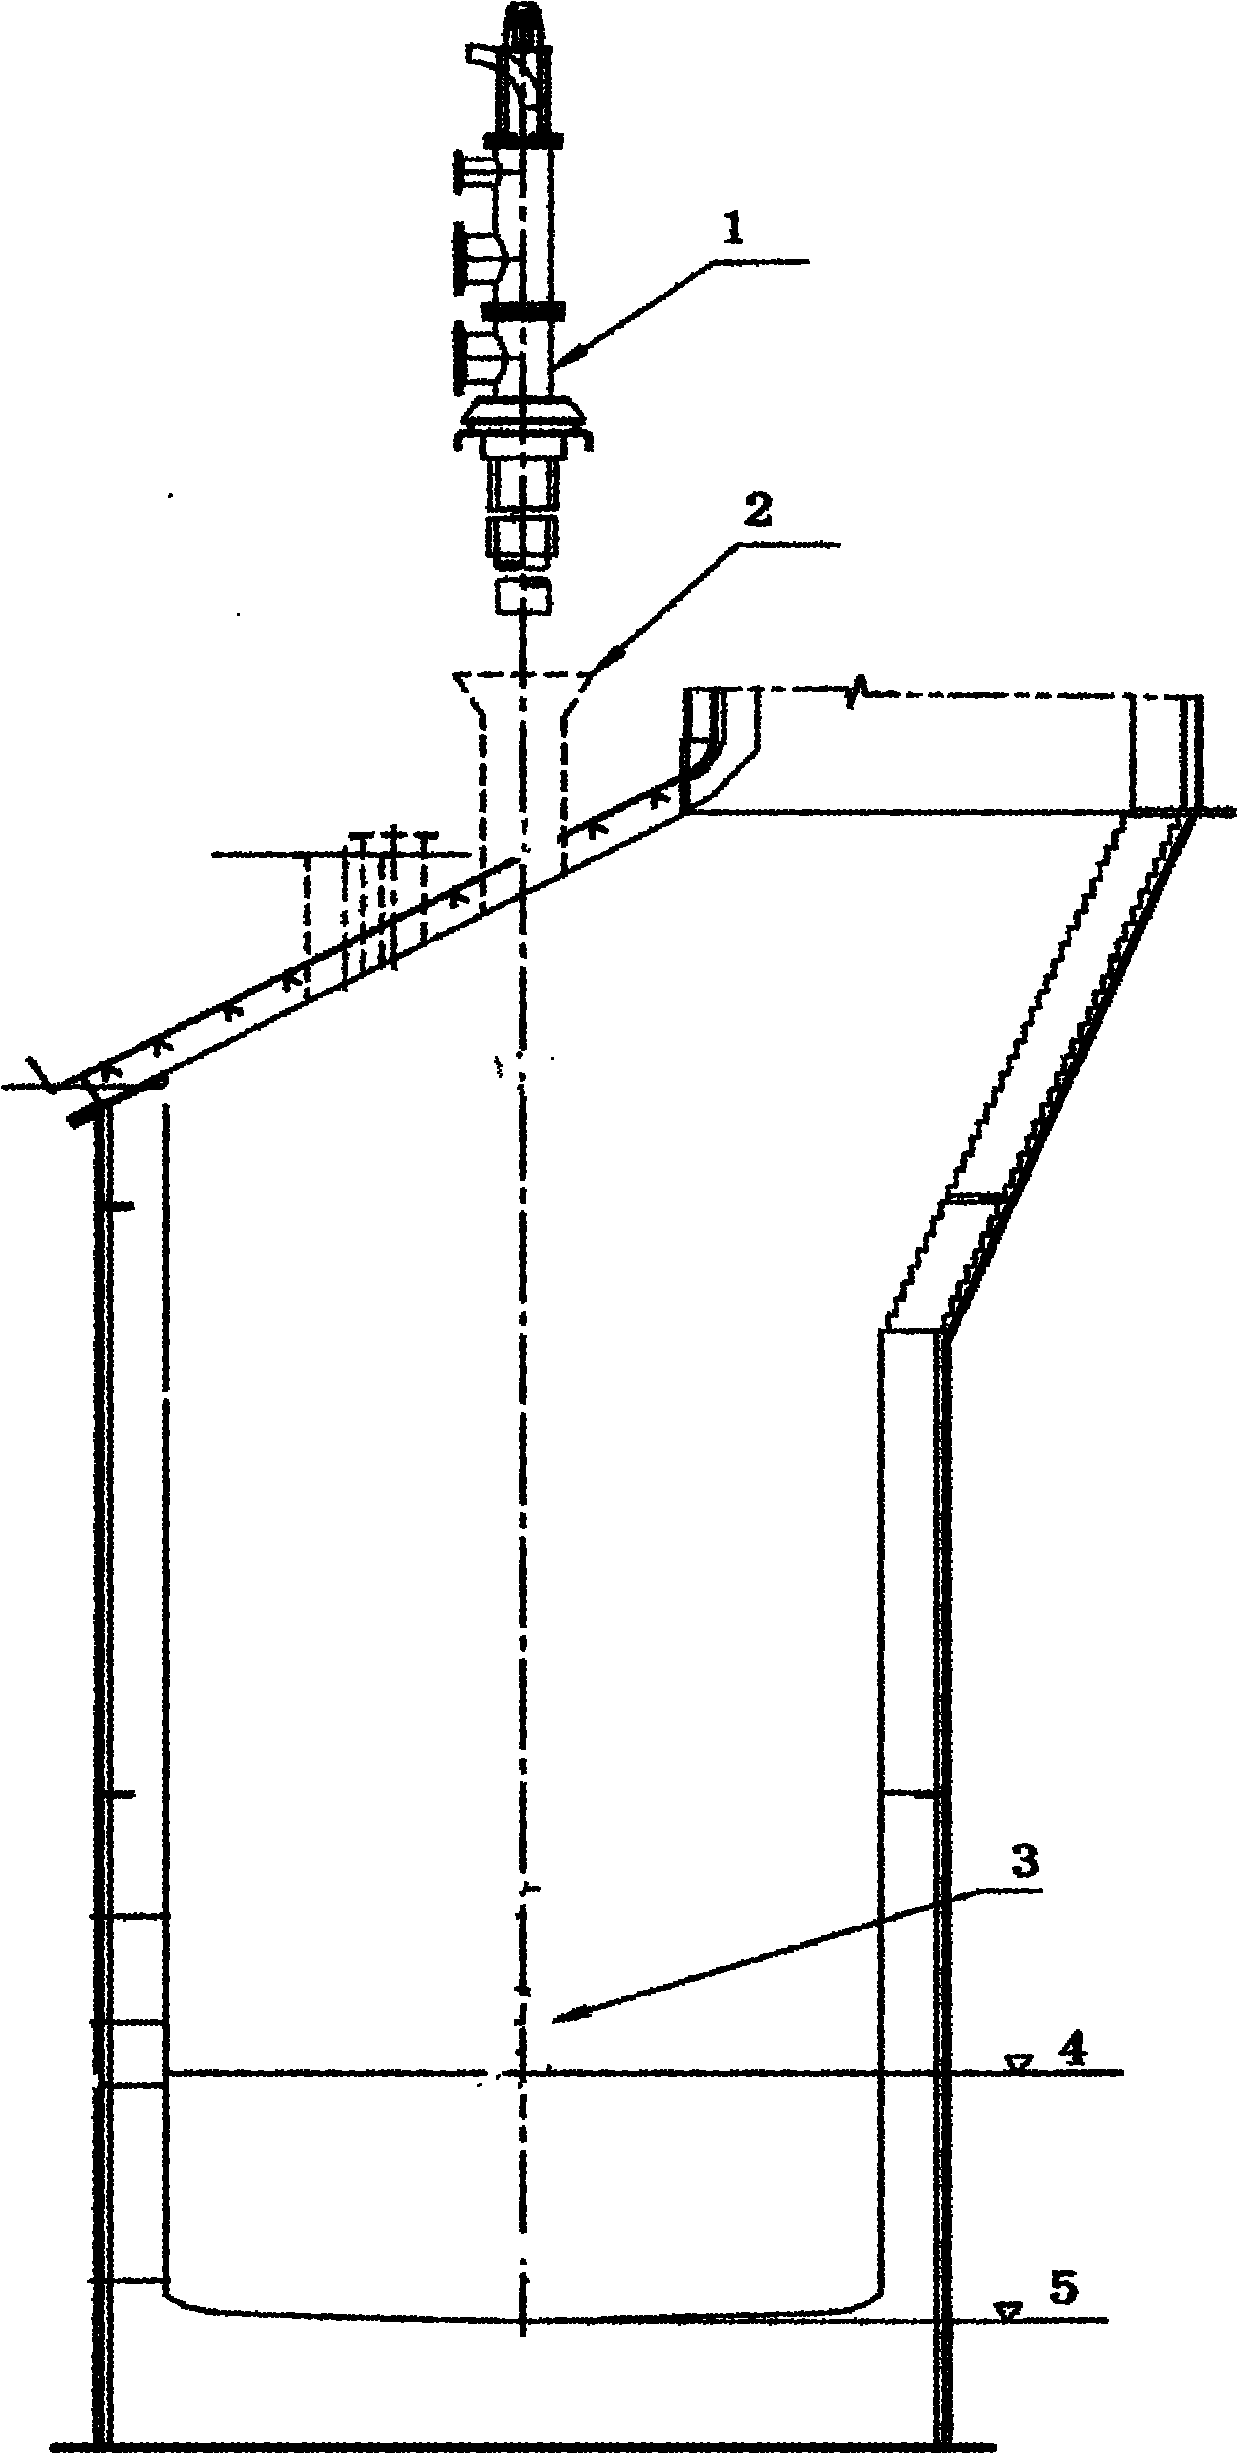 Method for smelting nickel ore concentrate by using smelting furnace